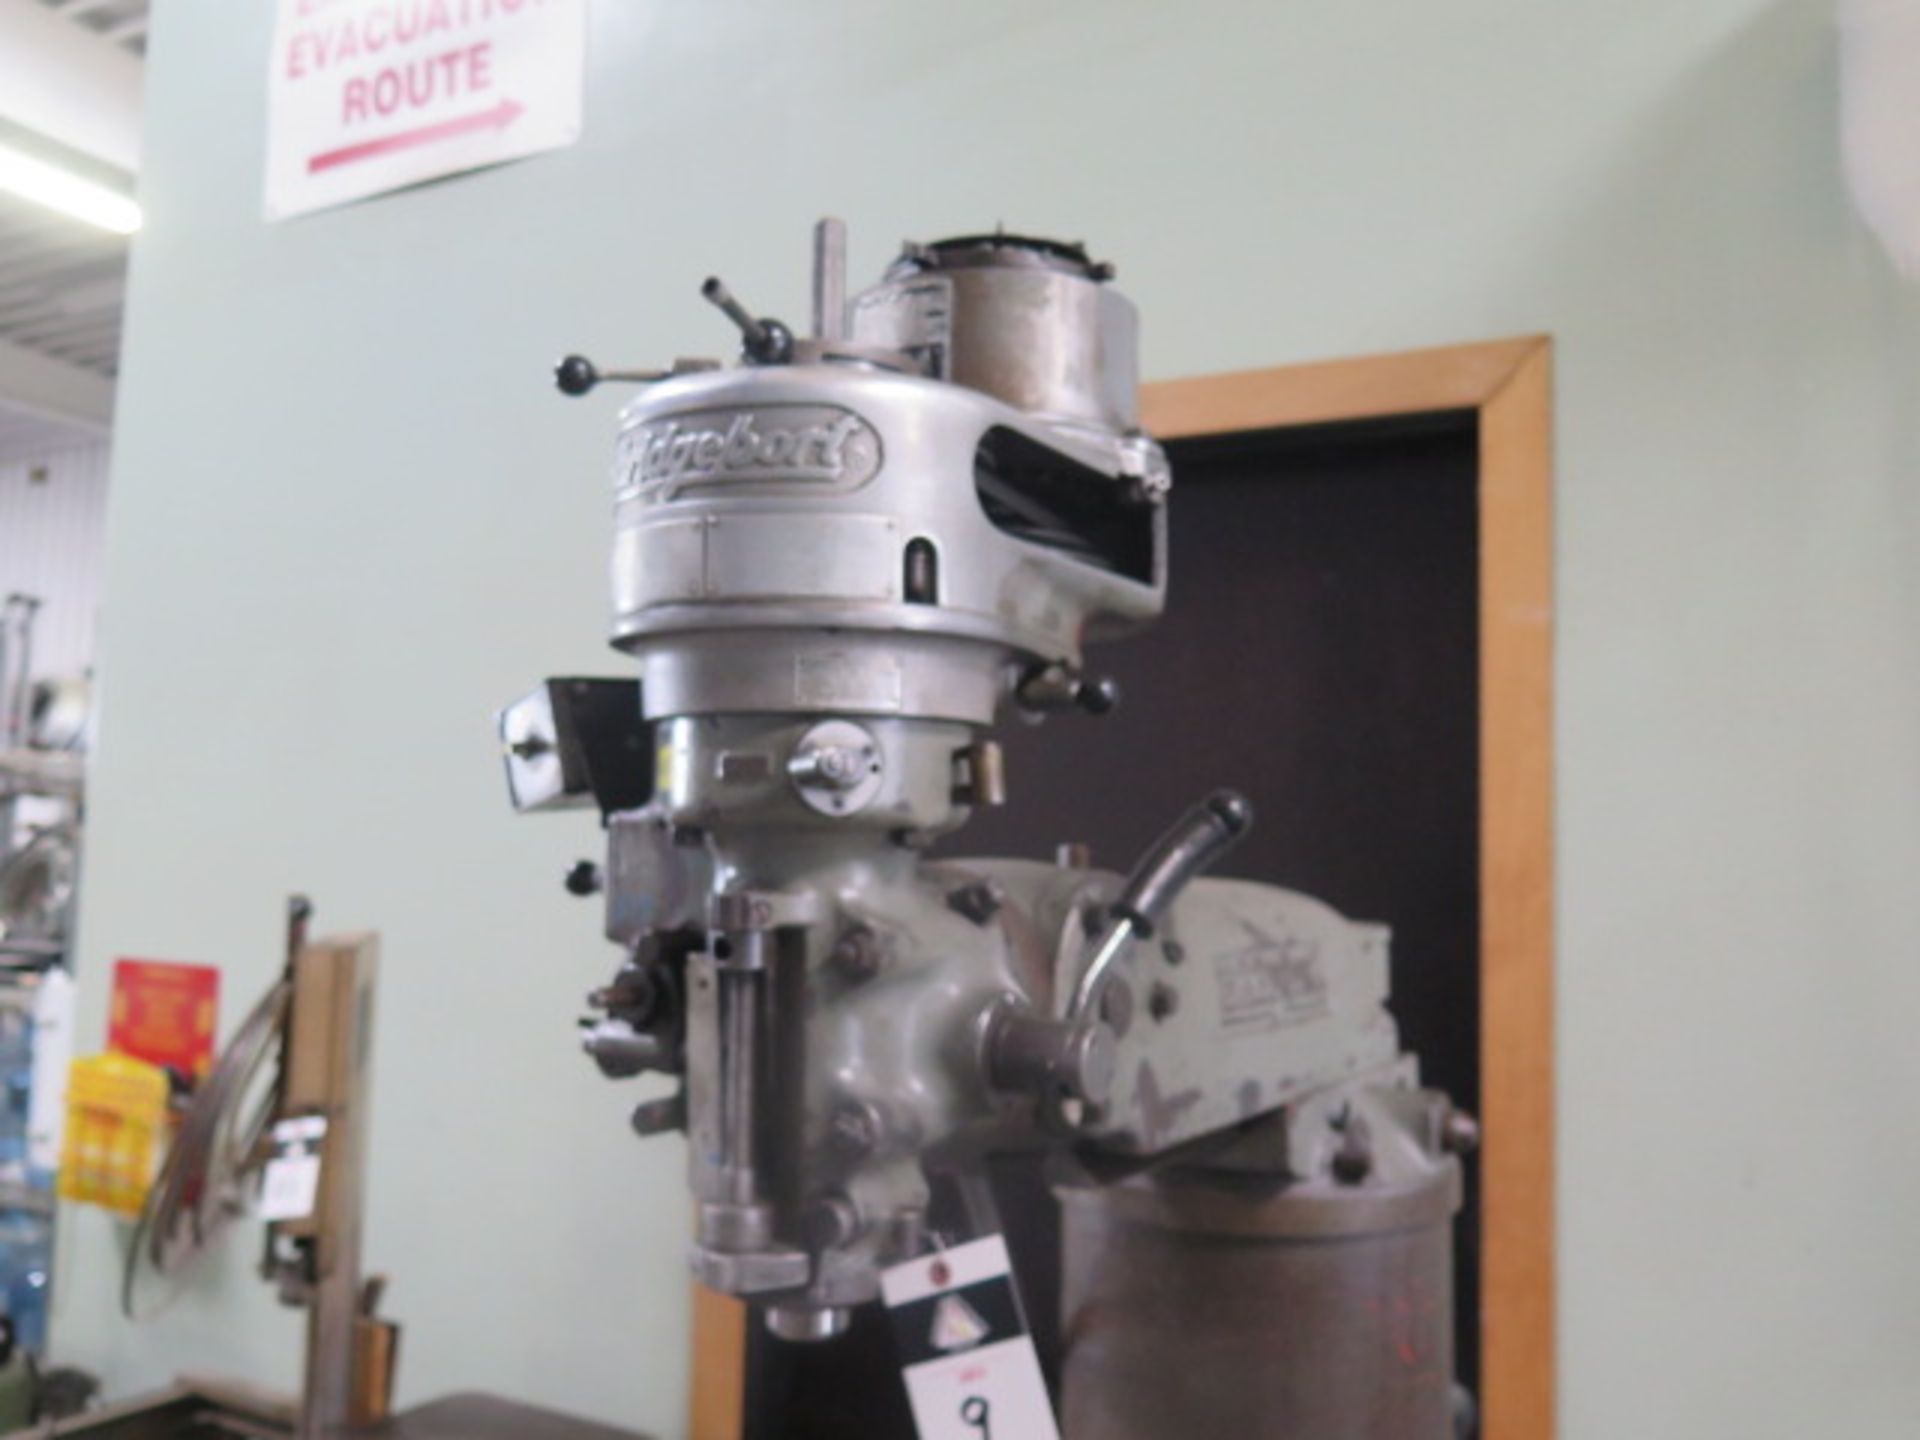 Bridgeport Vertical Mill w/ 1Hp Motor, 80-2720 RPM, 8-Speeds, 11” Riser, 9” x 42” Table SOLD AS IS - Image 4 of 11